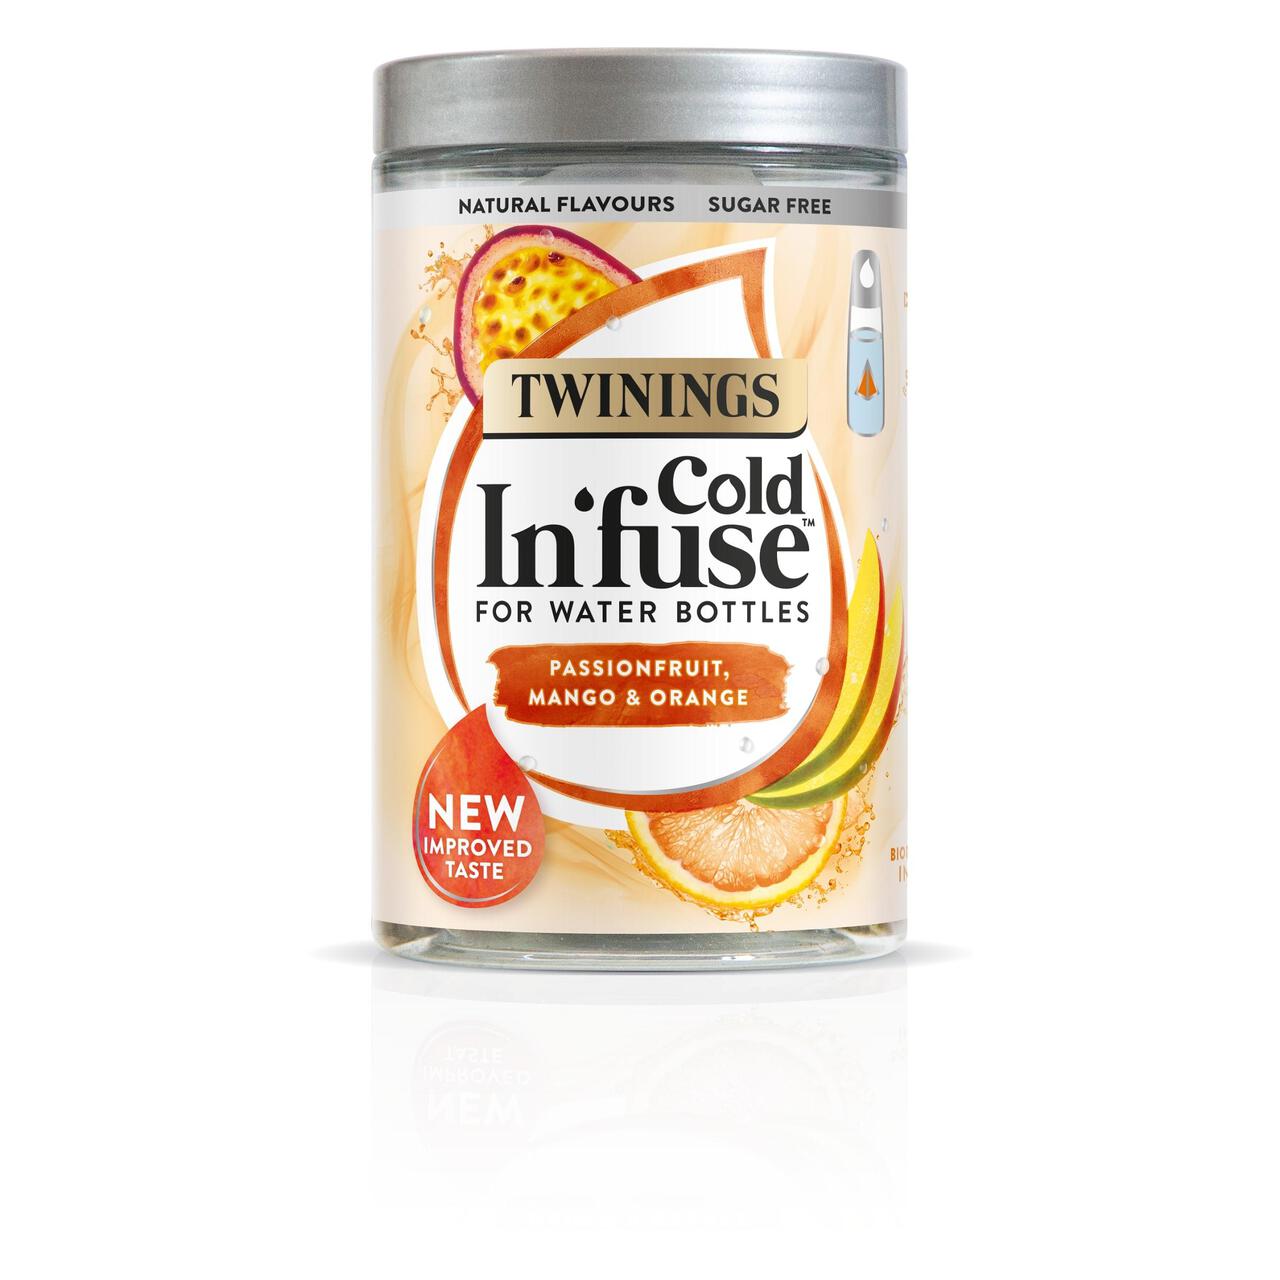 Twinings Cold In'fuse Passionfruit, Mango & Orange 12 Infusers 12 per pack